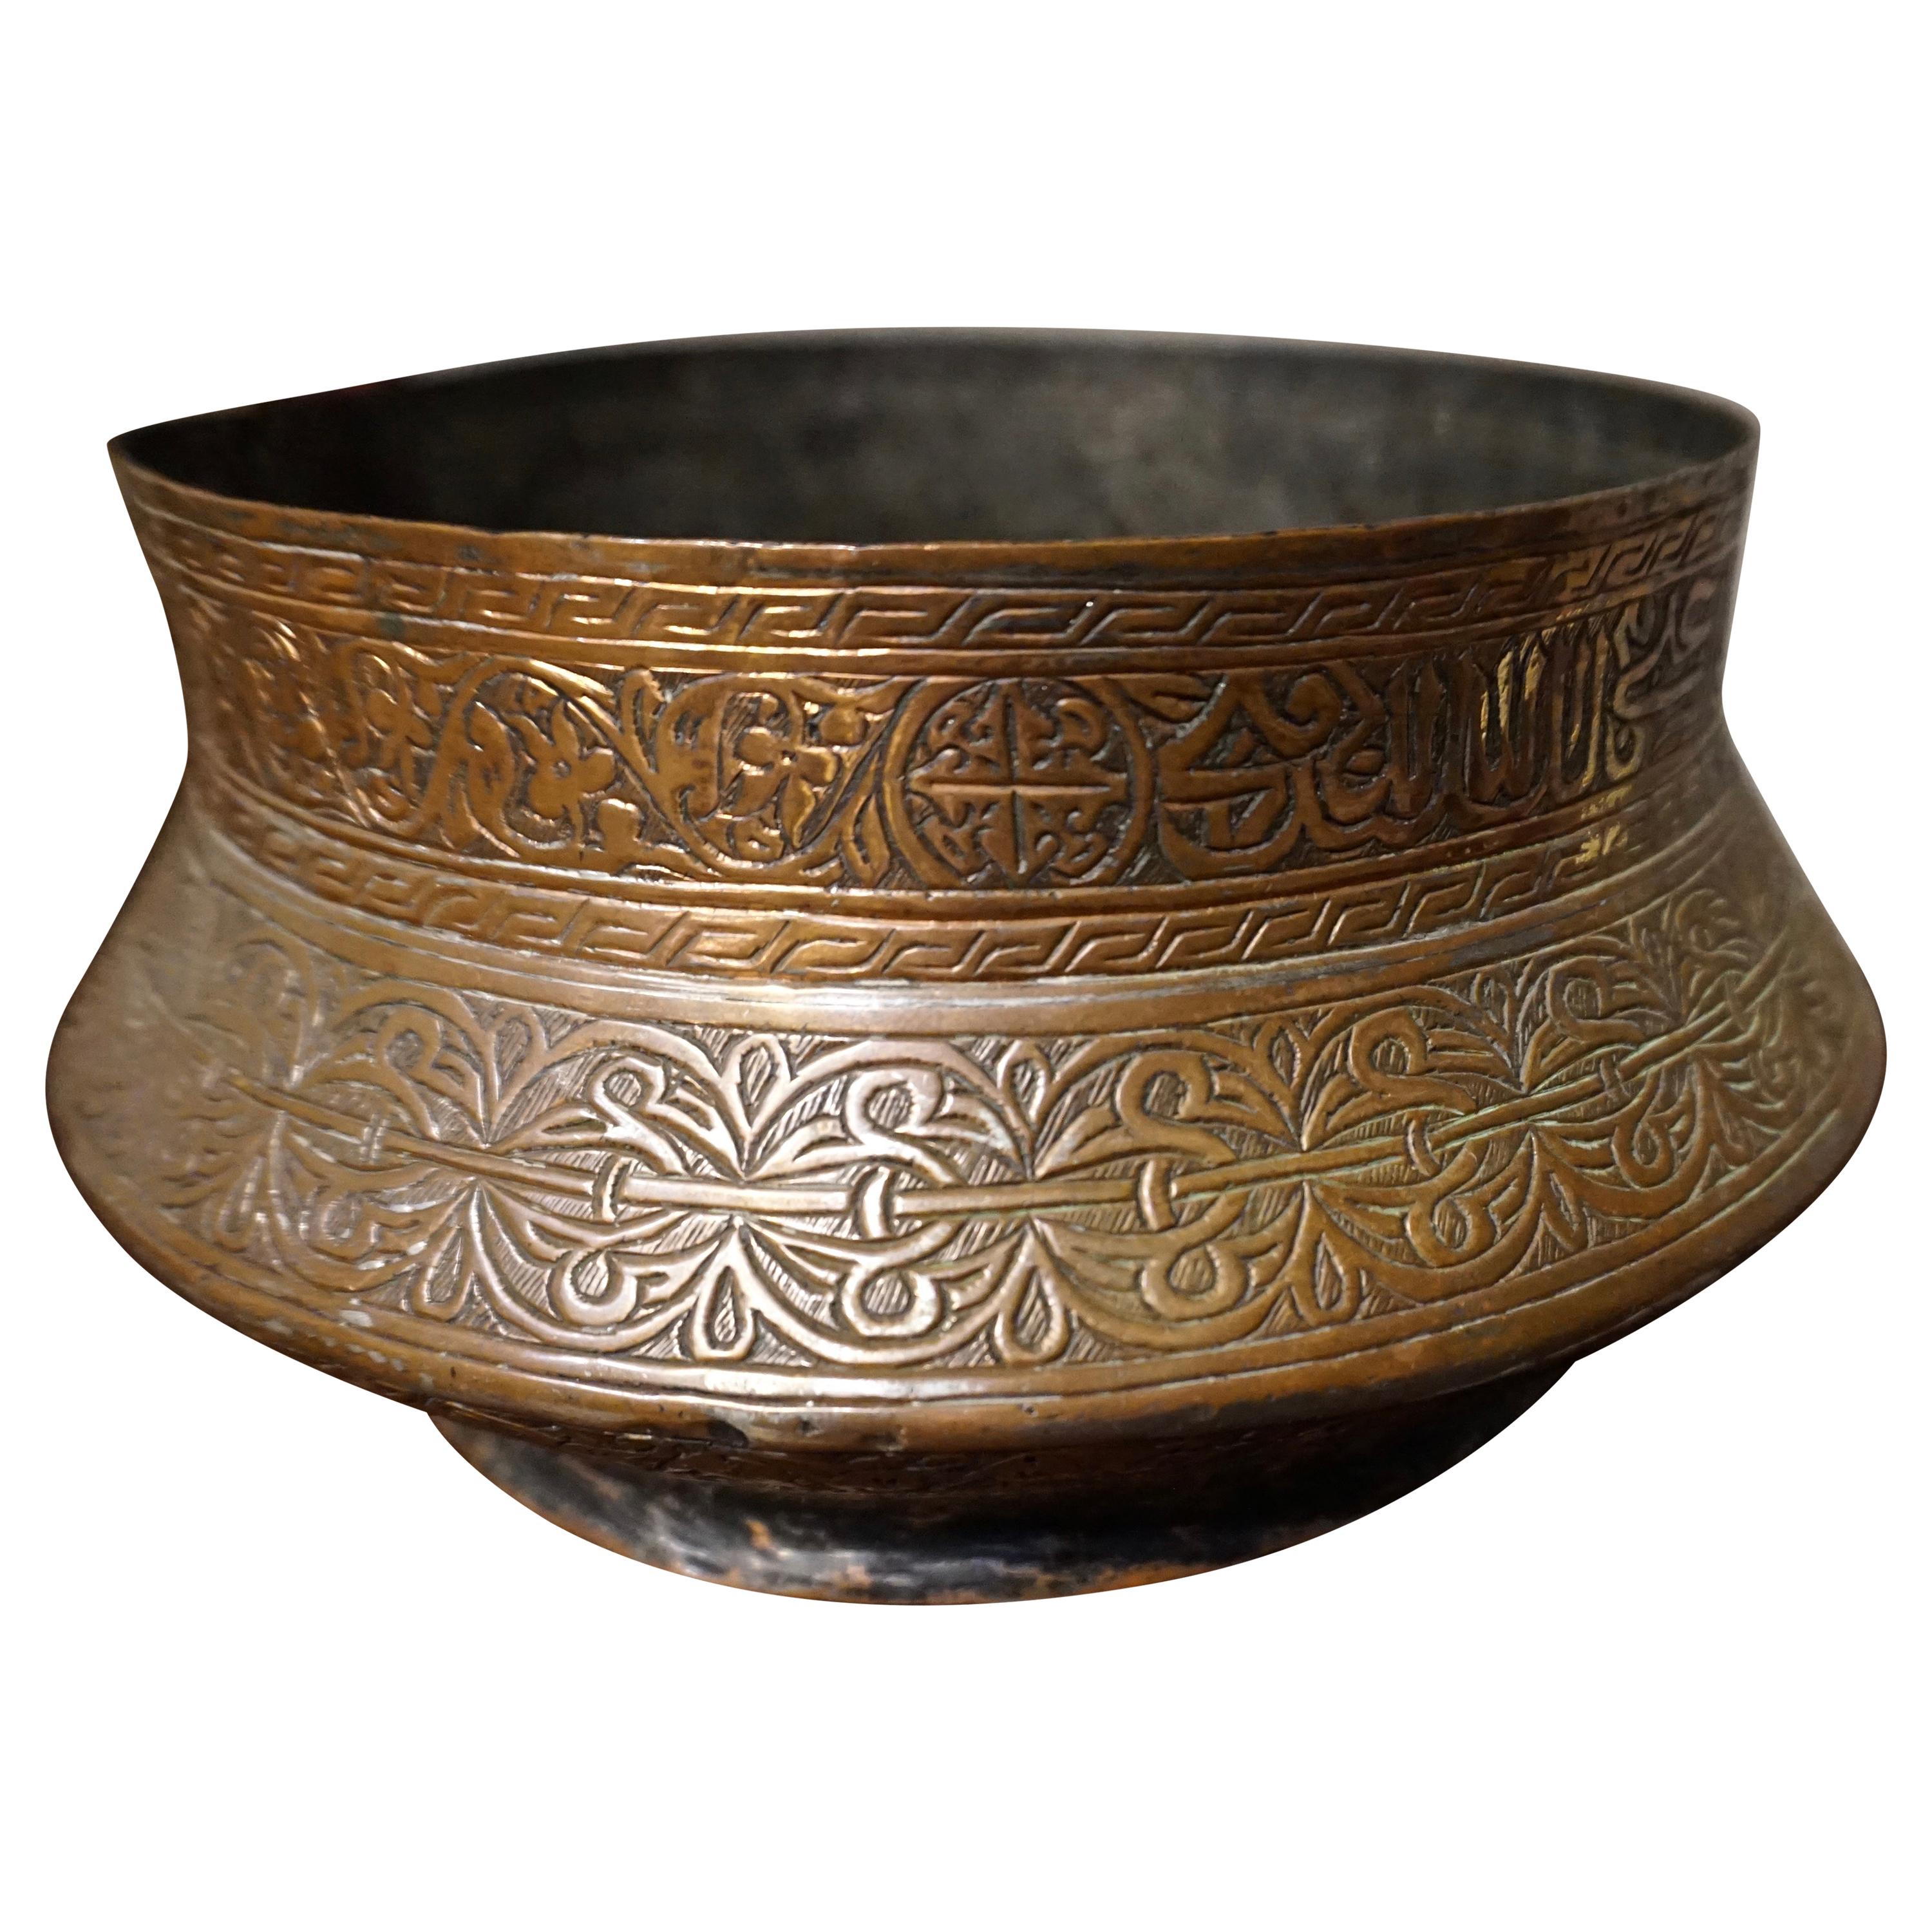 https://a.1stdibscdn.com/islamic-ottoman-hand-engraved-copper-and-bronze-bowl-kufic-script-for-sale/1121189/f_222382521611912409893/22238252_master.jpeg